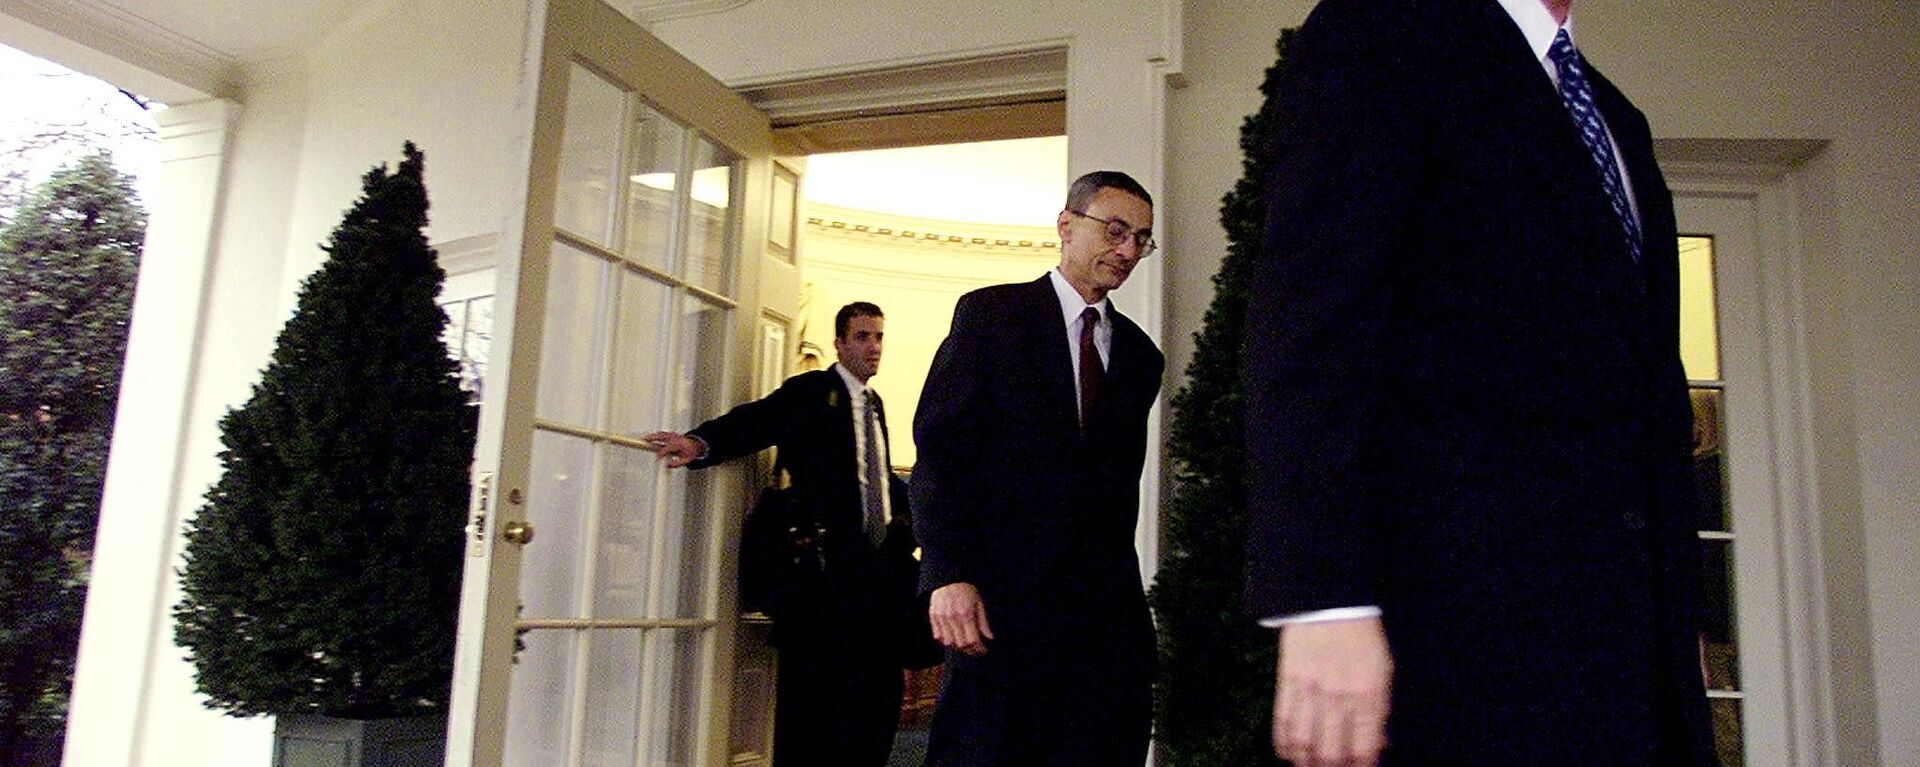 Former US President Bill Clinton (R), with his Chief of Staff John Podesta (C) and his aid Doug Band (L), leaves the Oval Office of the White House for the last time 20 January, 2001, in Washington - Sputnik International, 1920, 11.03.2021